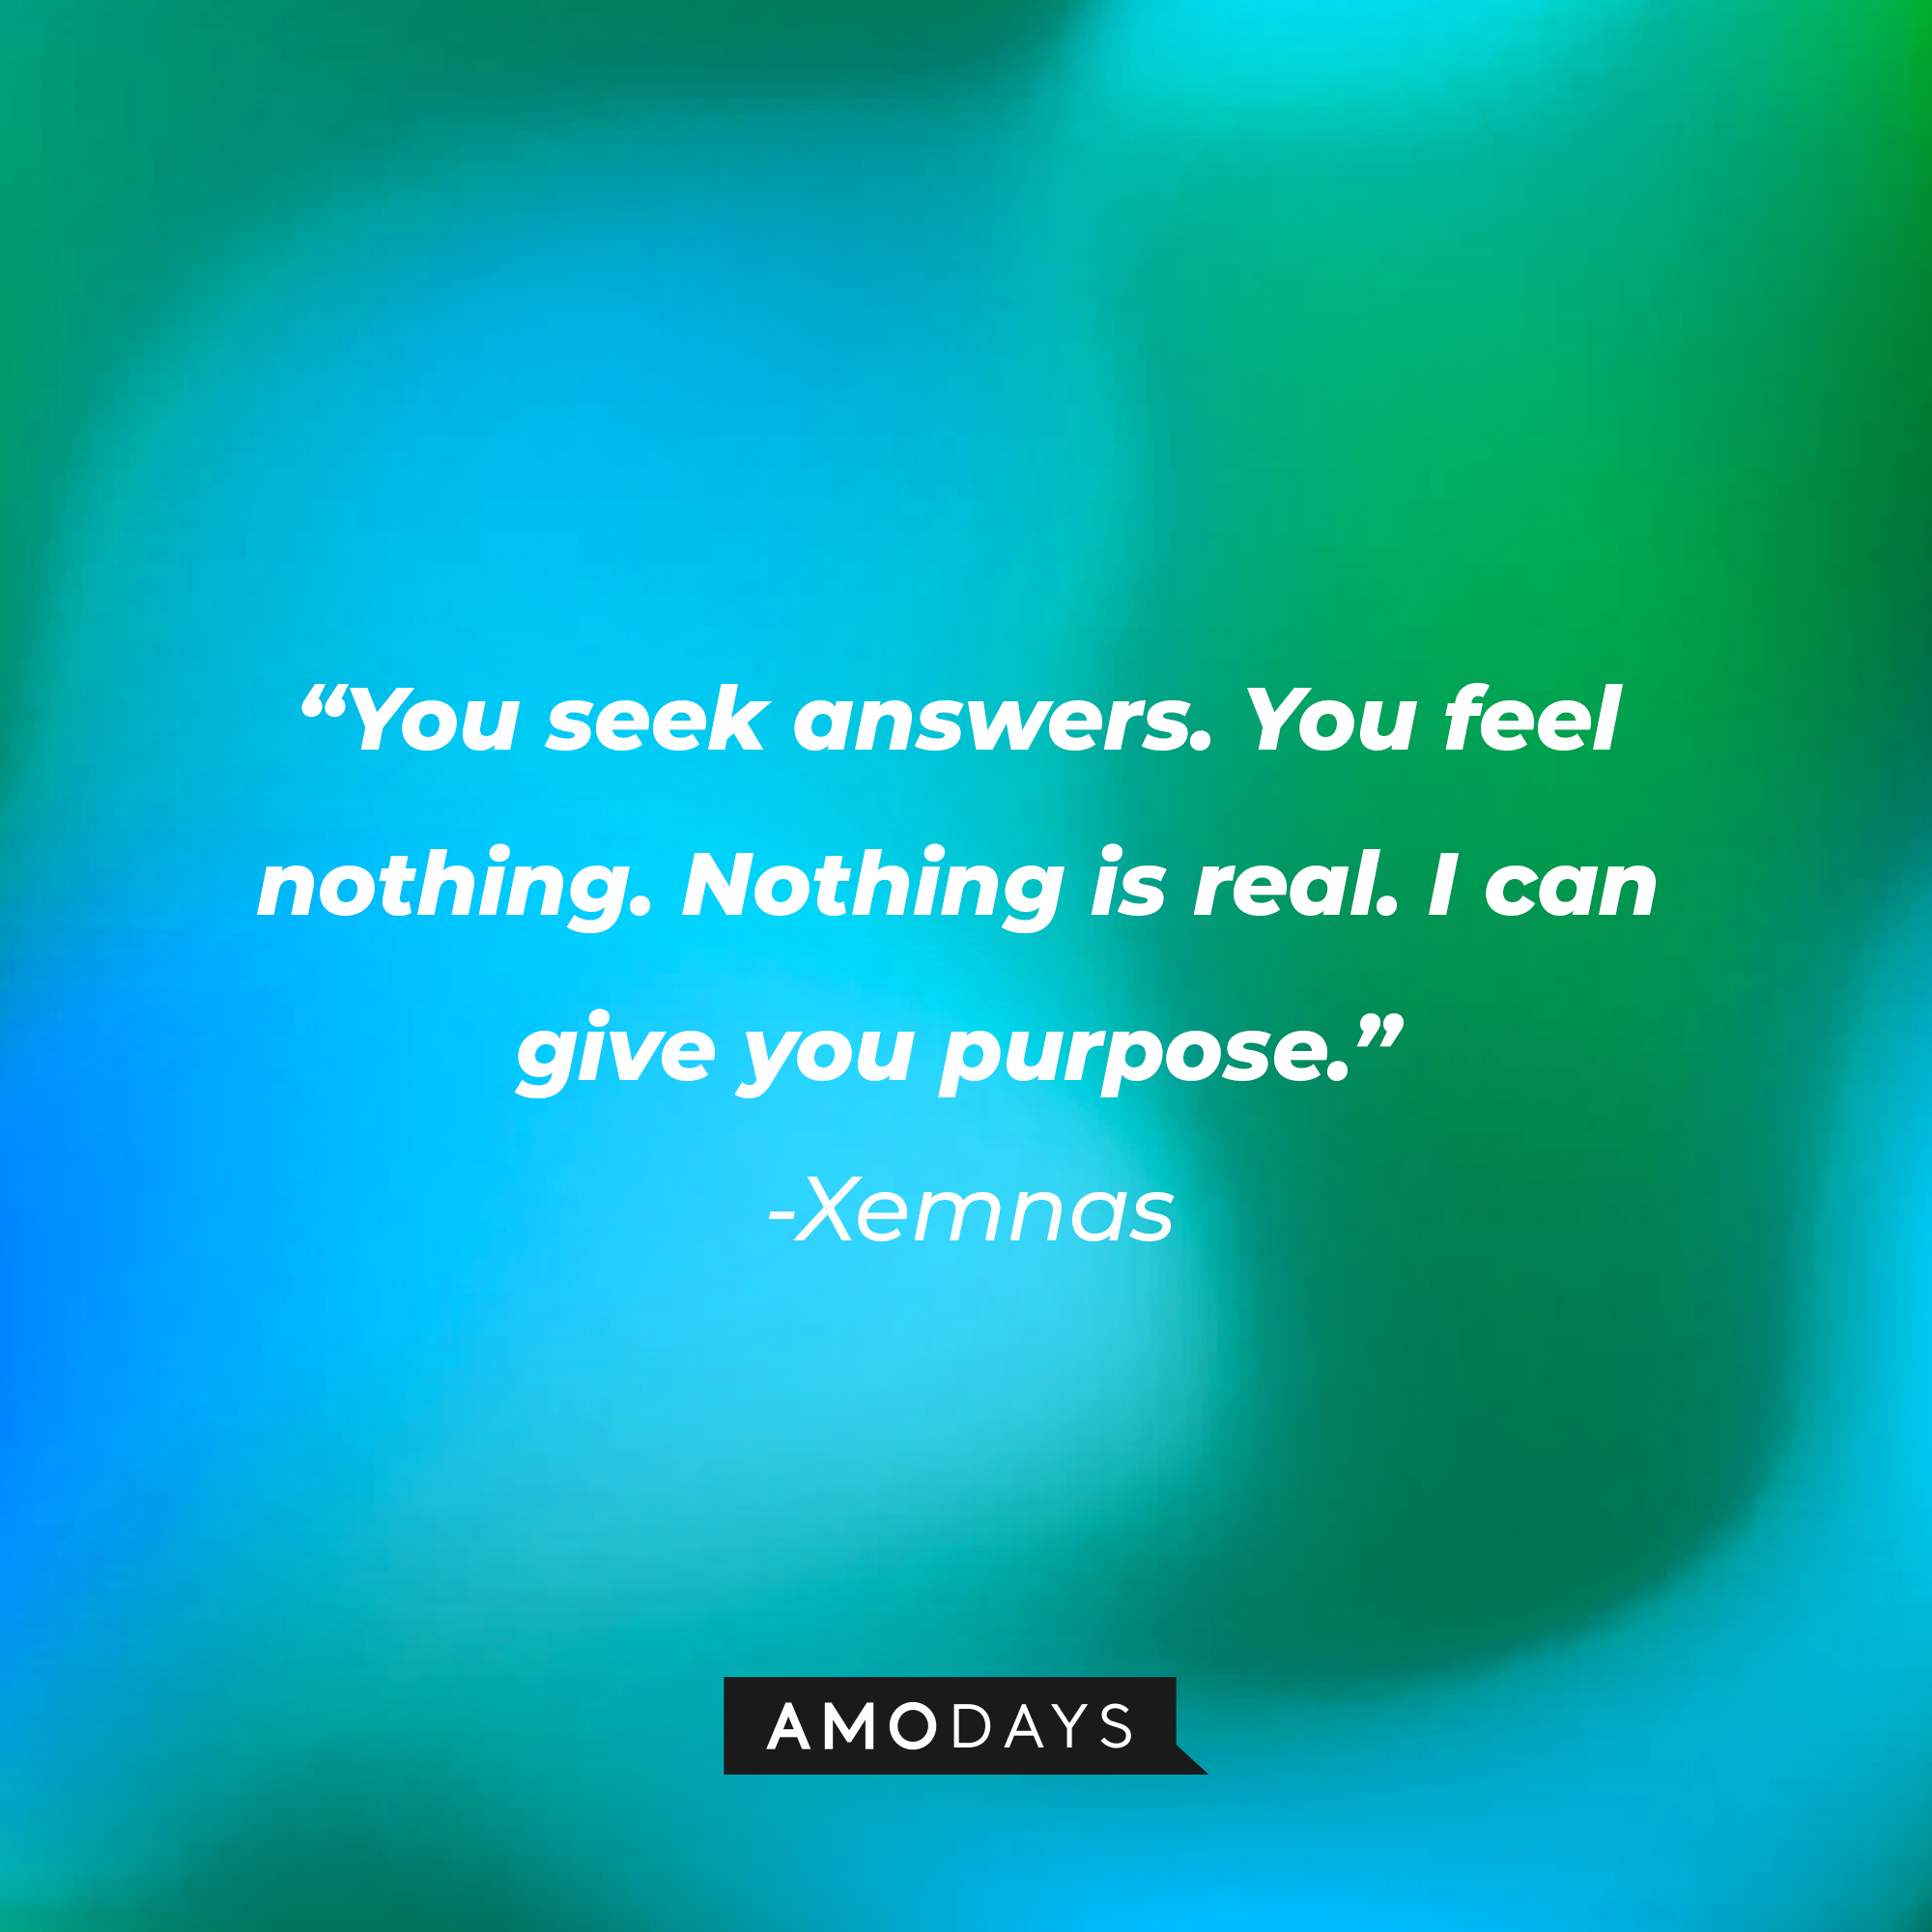 “You seek answers. You feel nothing. Nothing is real. I can give you purpose.”